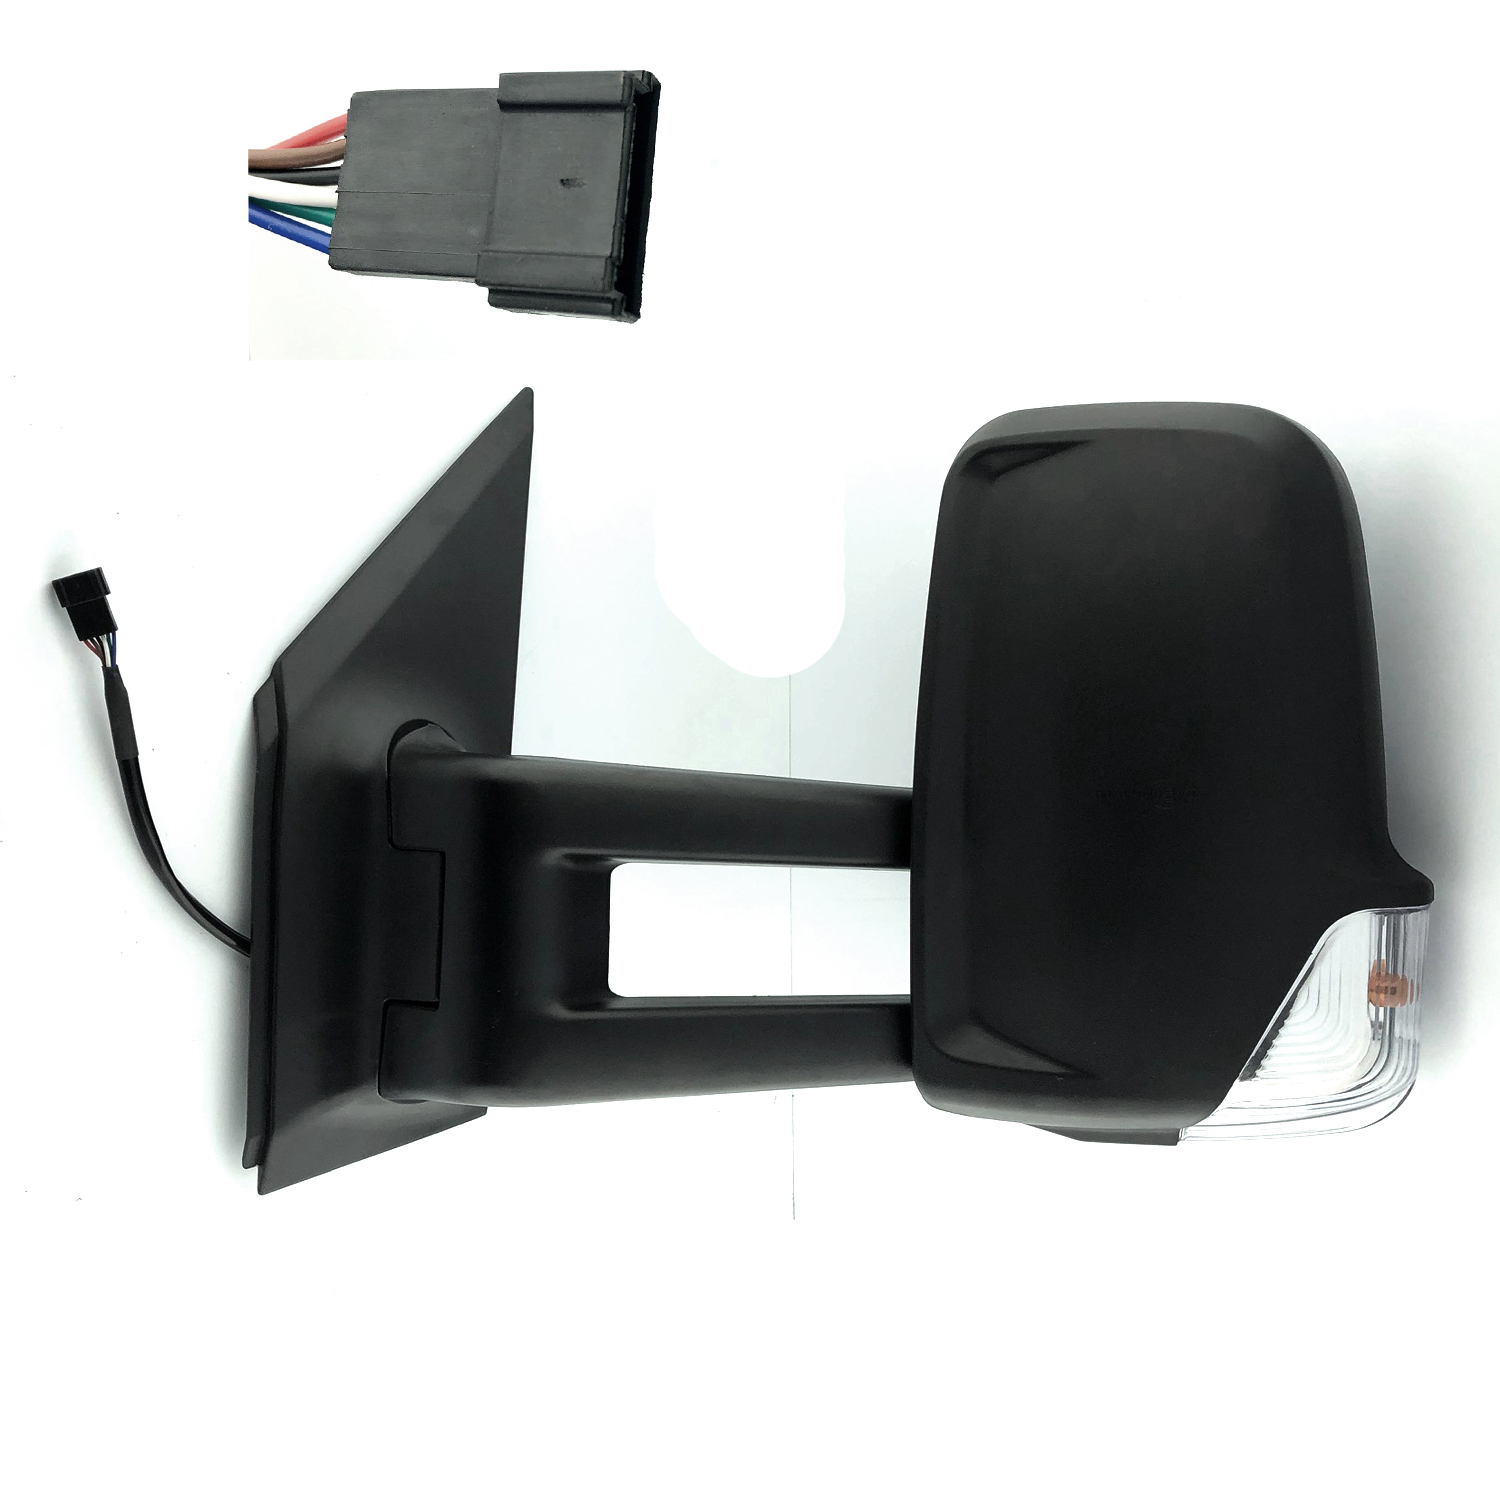 Mercedes Sprinter CHASSIS CAB Complete Wing Mirror Unit LEFT HAND ( UK Passenger Side ) 2012 to 2017 – Electric Wing Mirror Unit ( Long Arm )